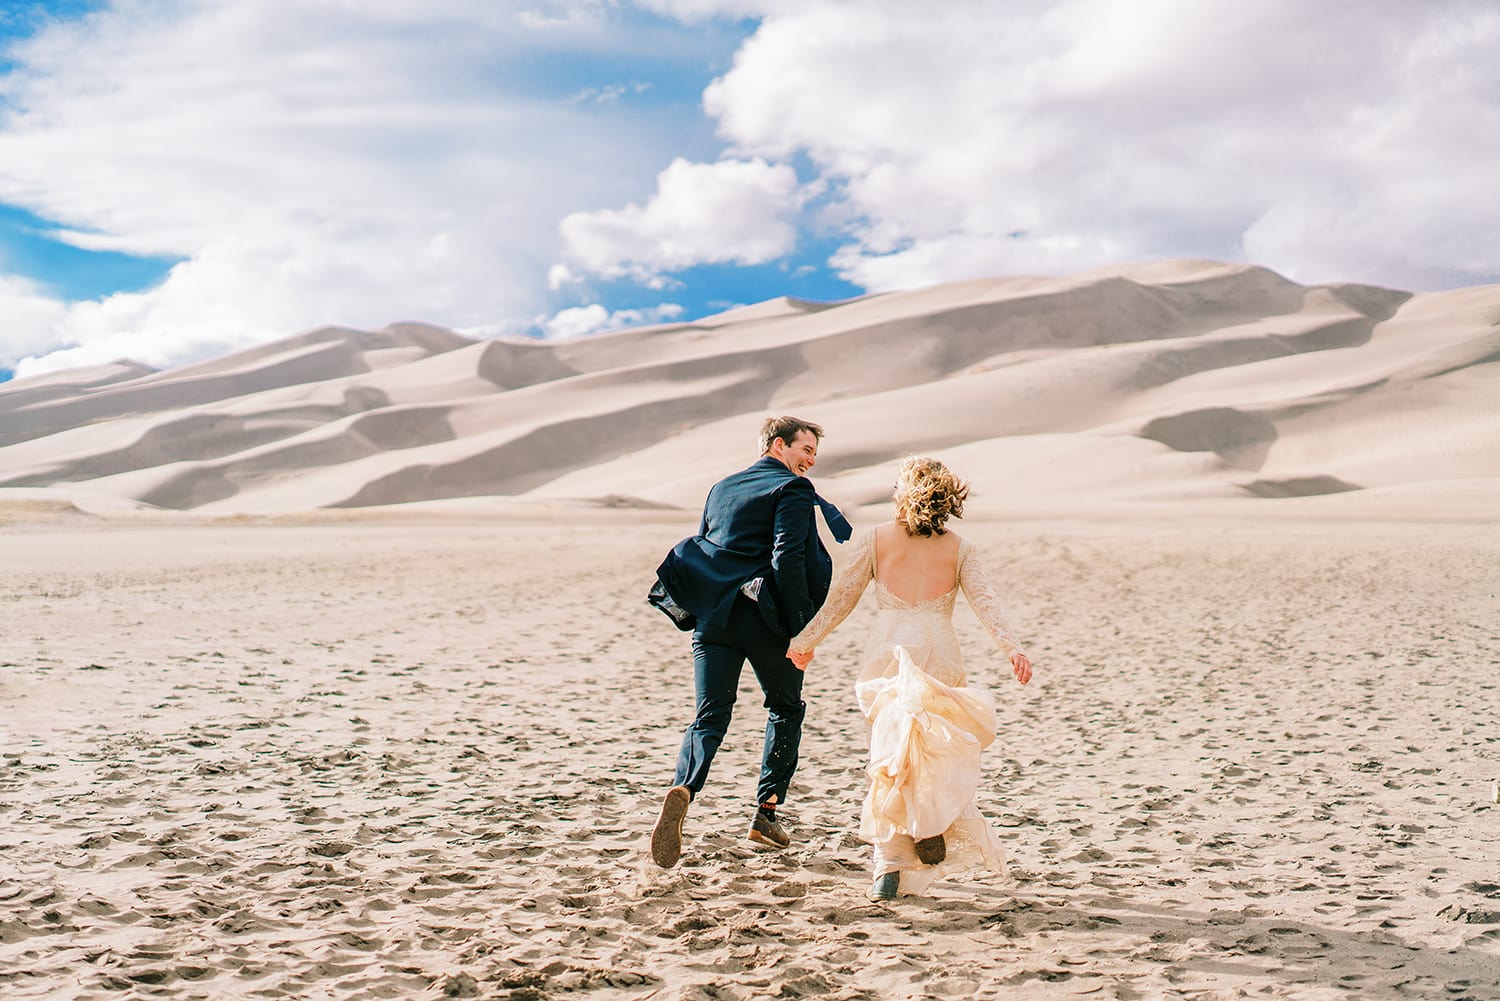 Bride and groom running in the sand in Great Sand Dunes National Park in Colorado.